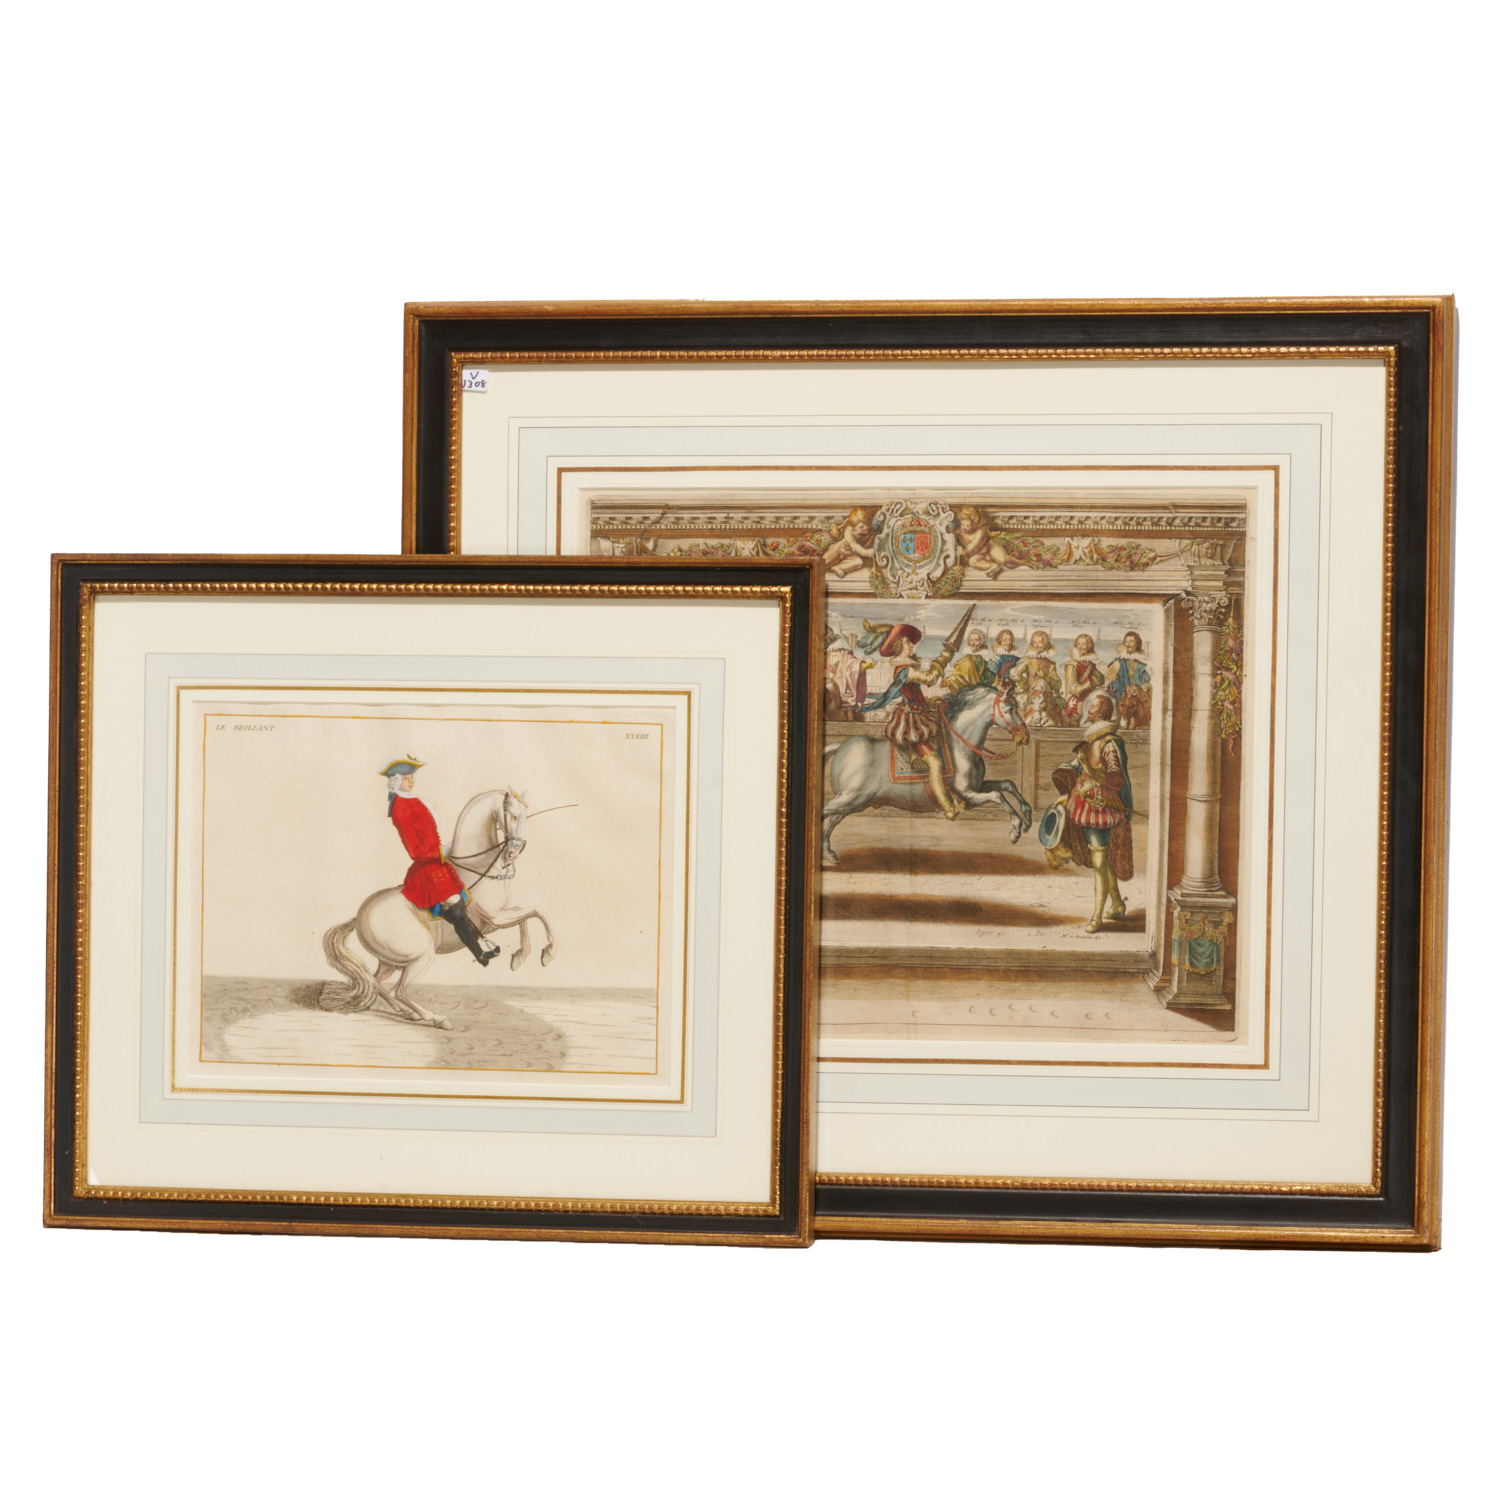  2 HAND COLORED EQUESTRIAN ENGRAVINGS 30bed2